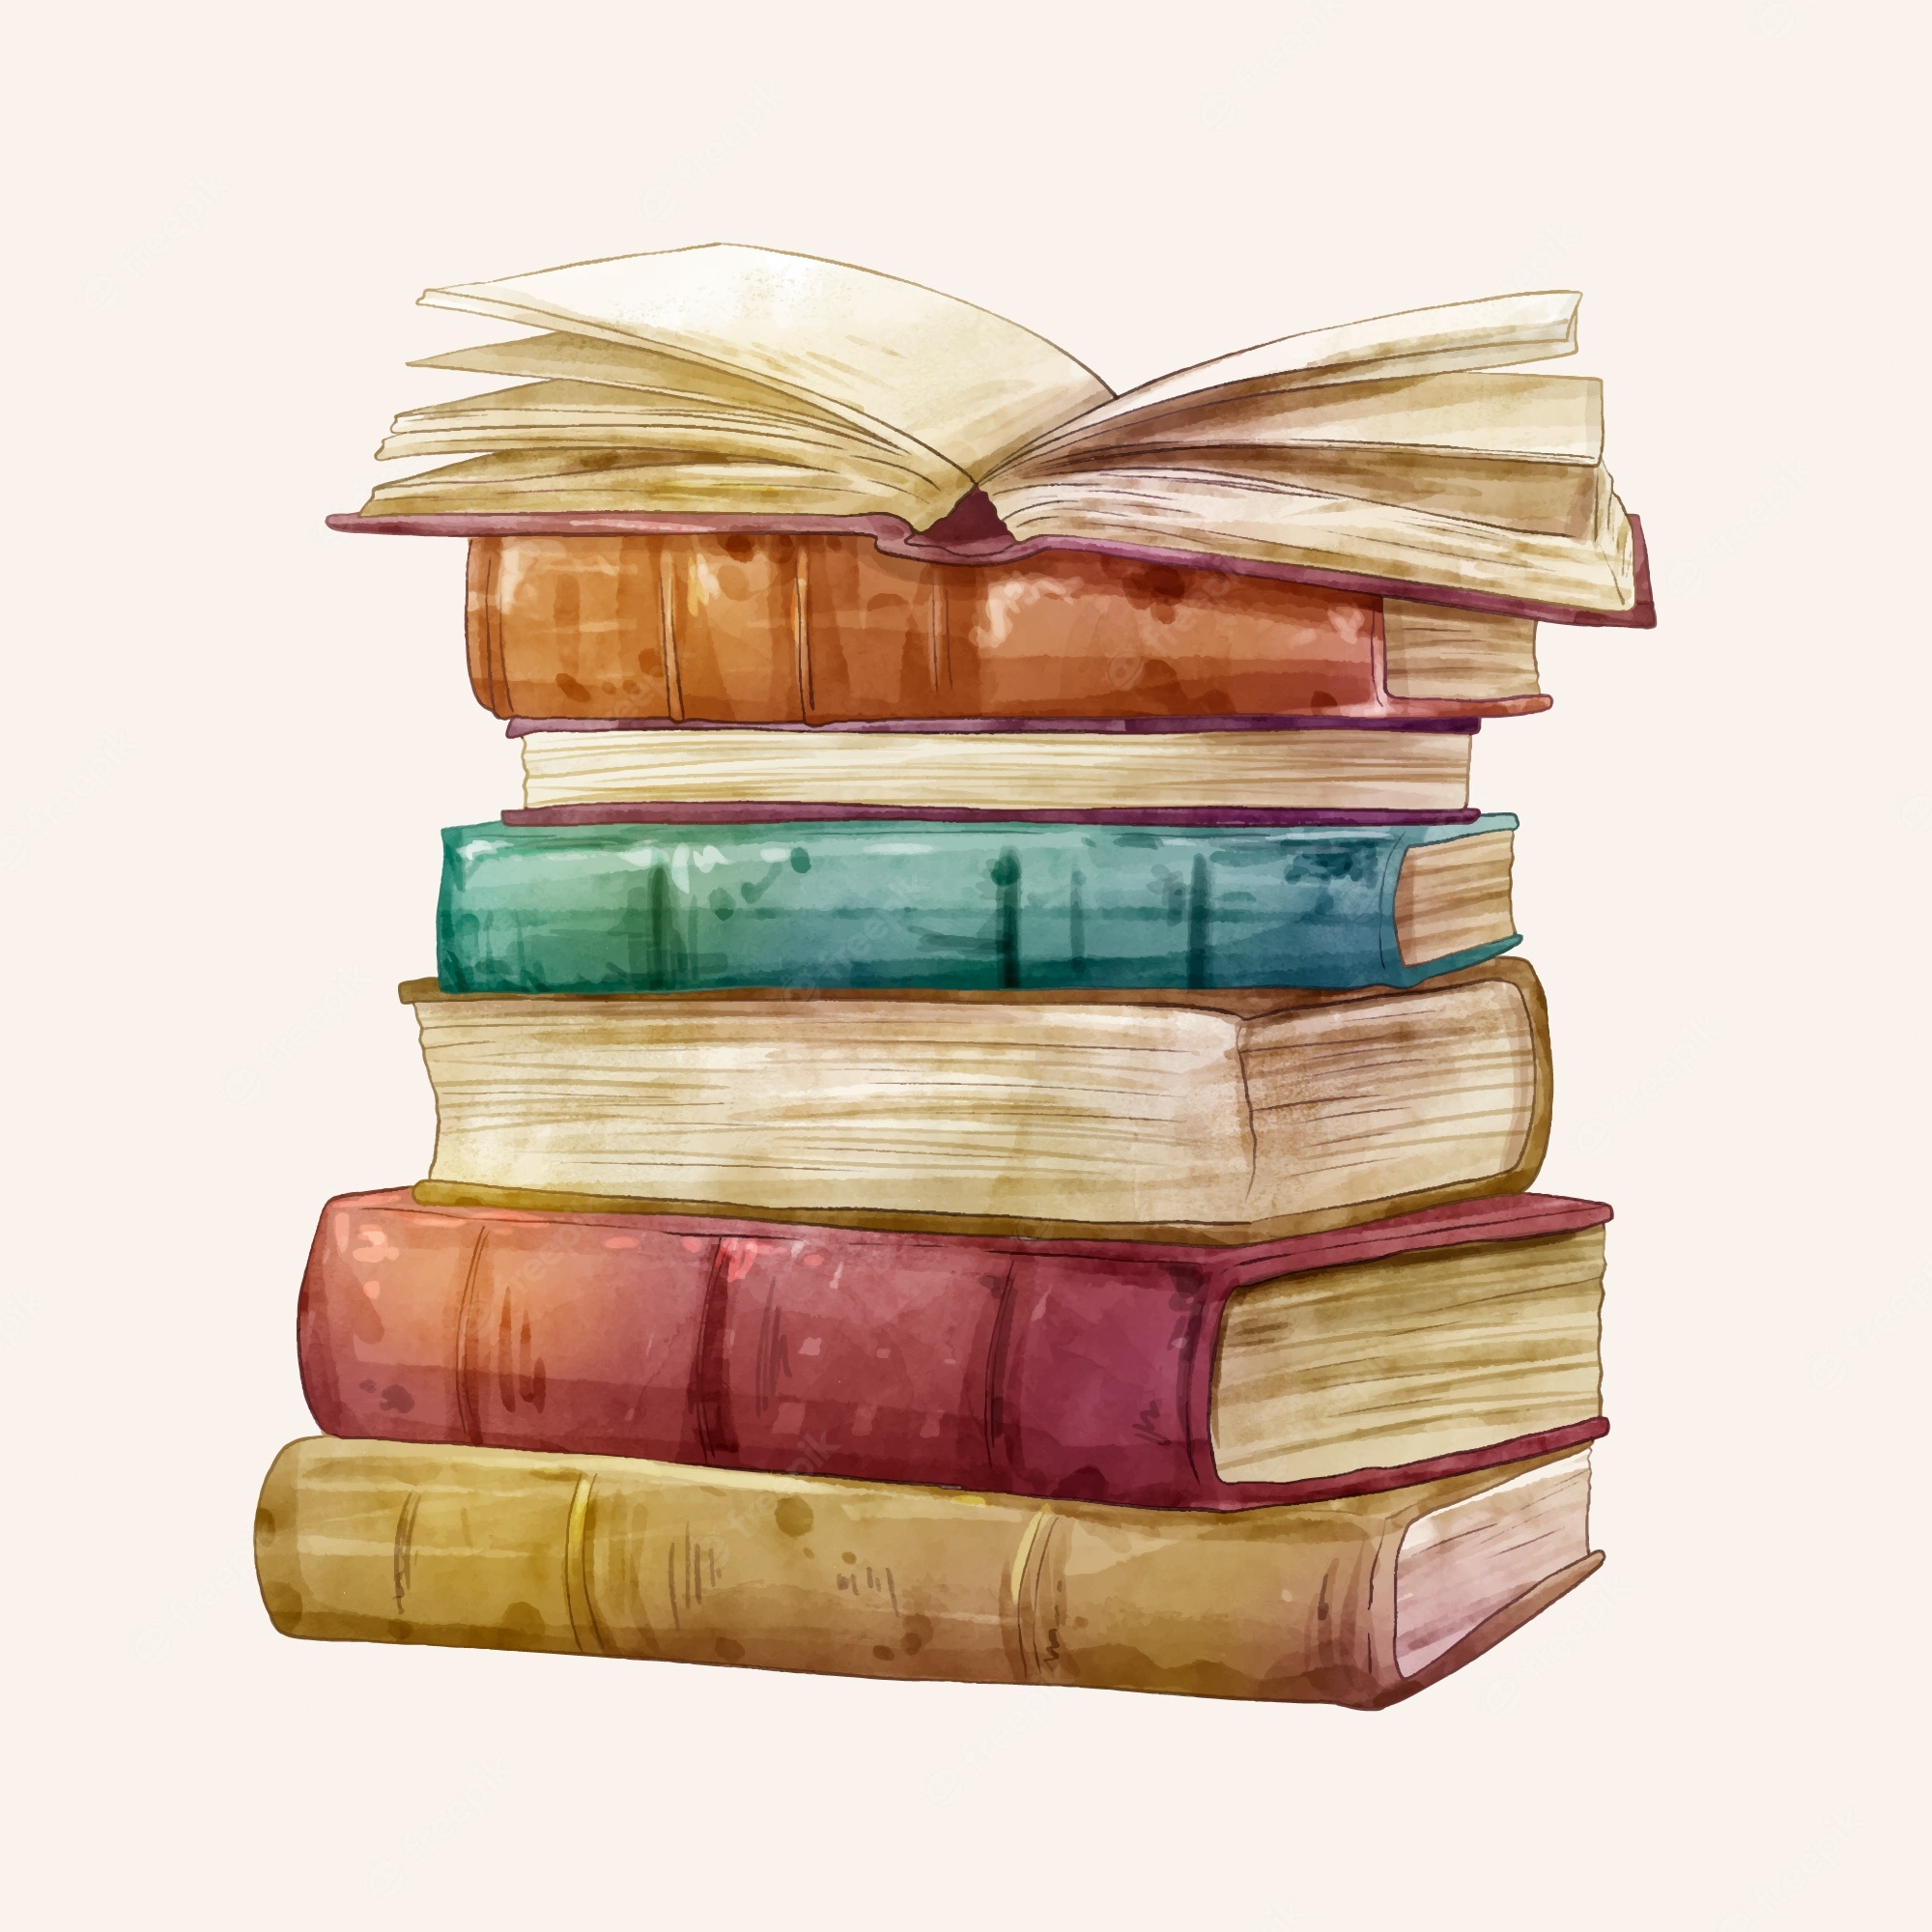 Stack books Image. Free Vectors, & PSD